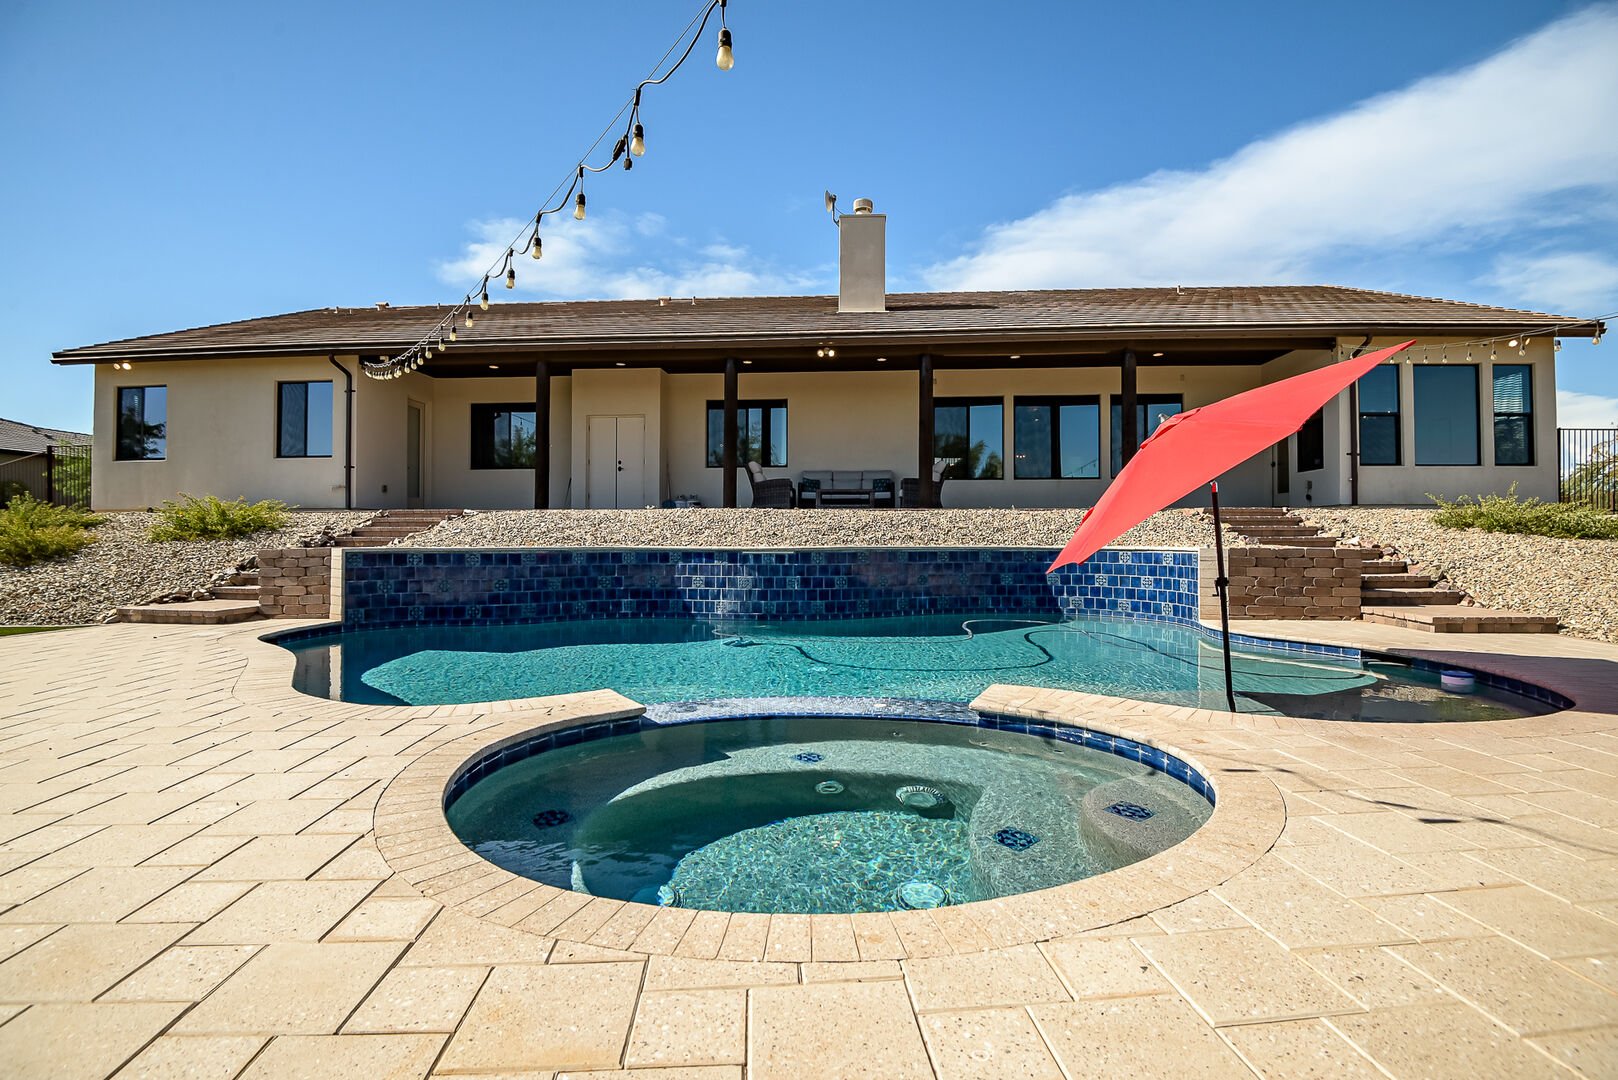 Vacation Rentals in Scottsdale with Hot Tubs